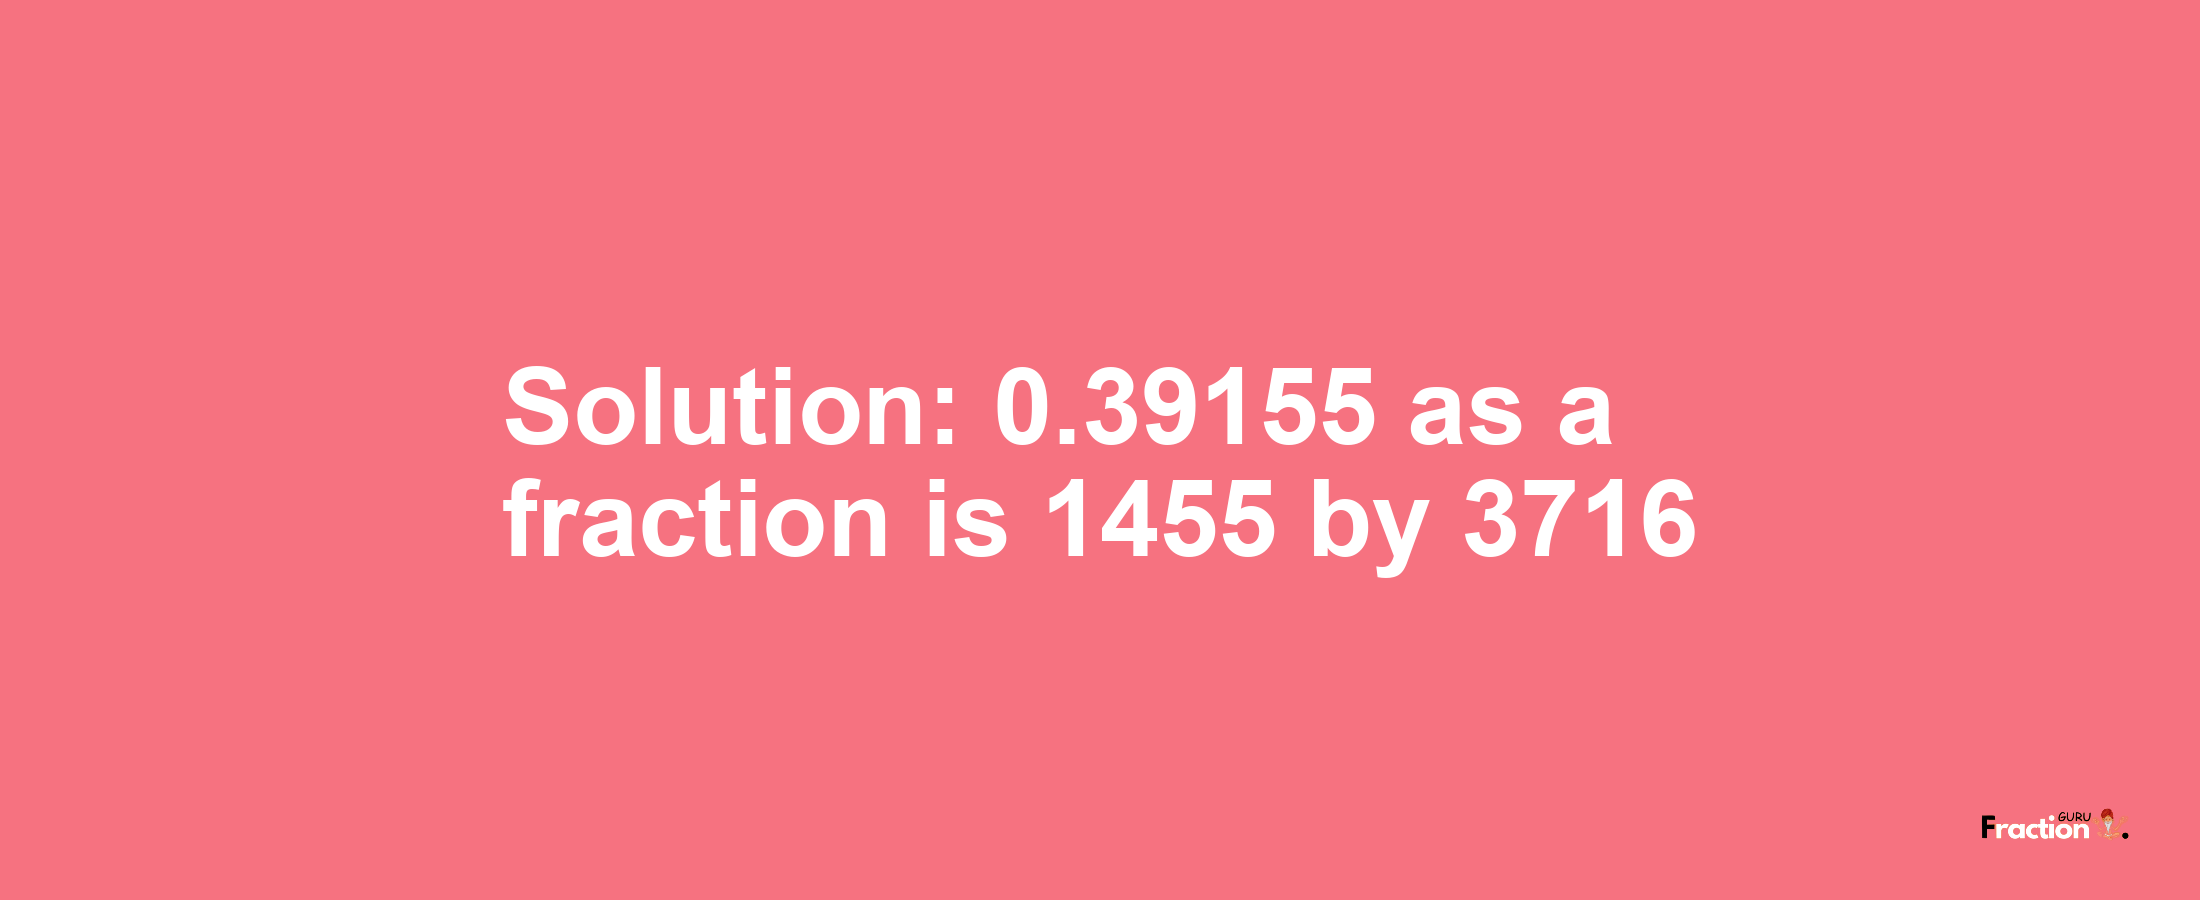 Solution:0.39155 as a fraction is 1455/3716